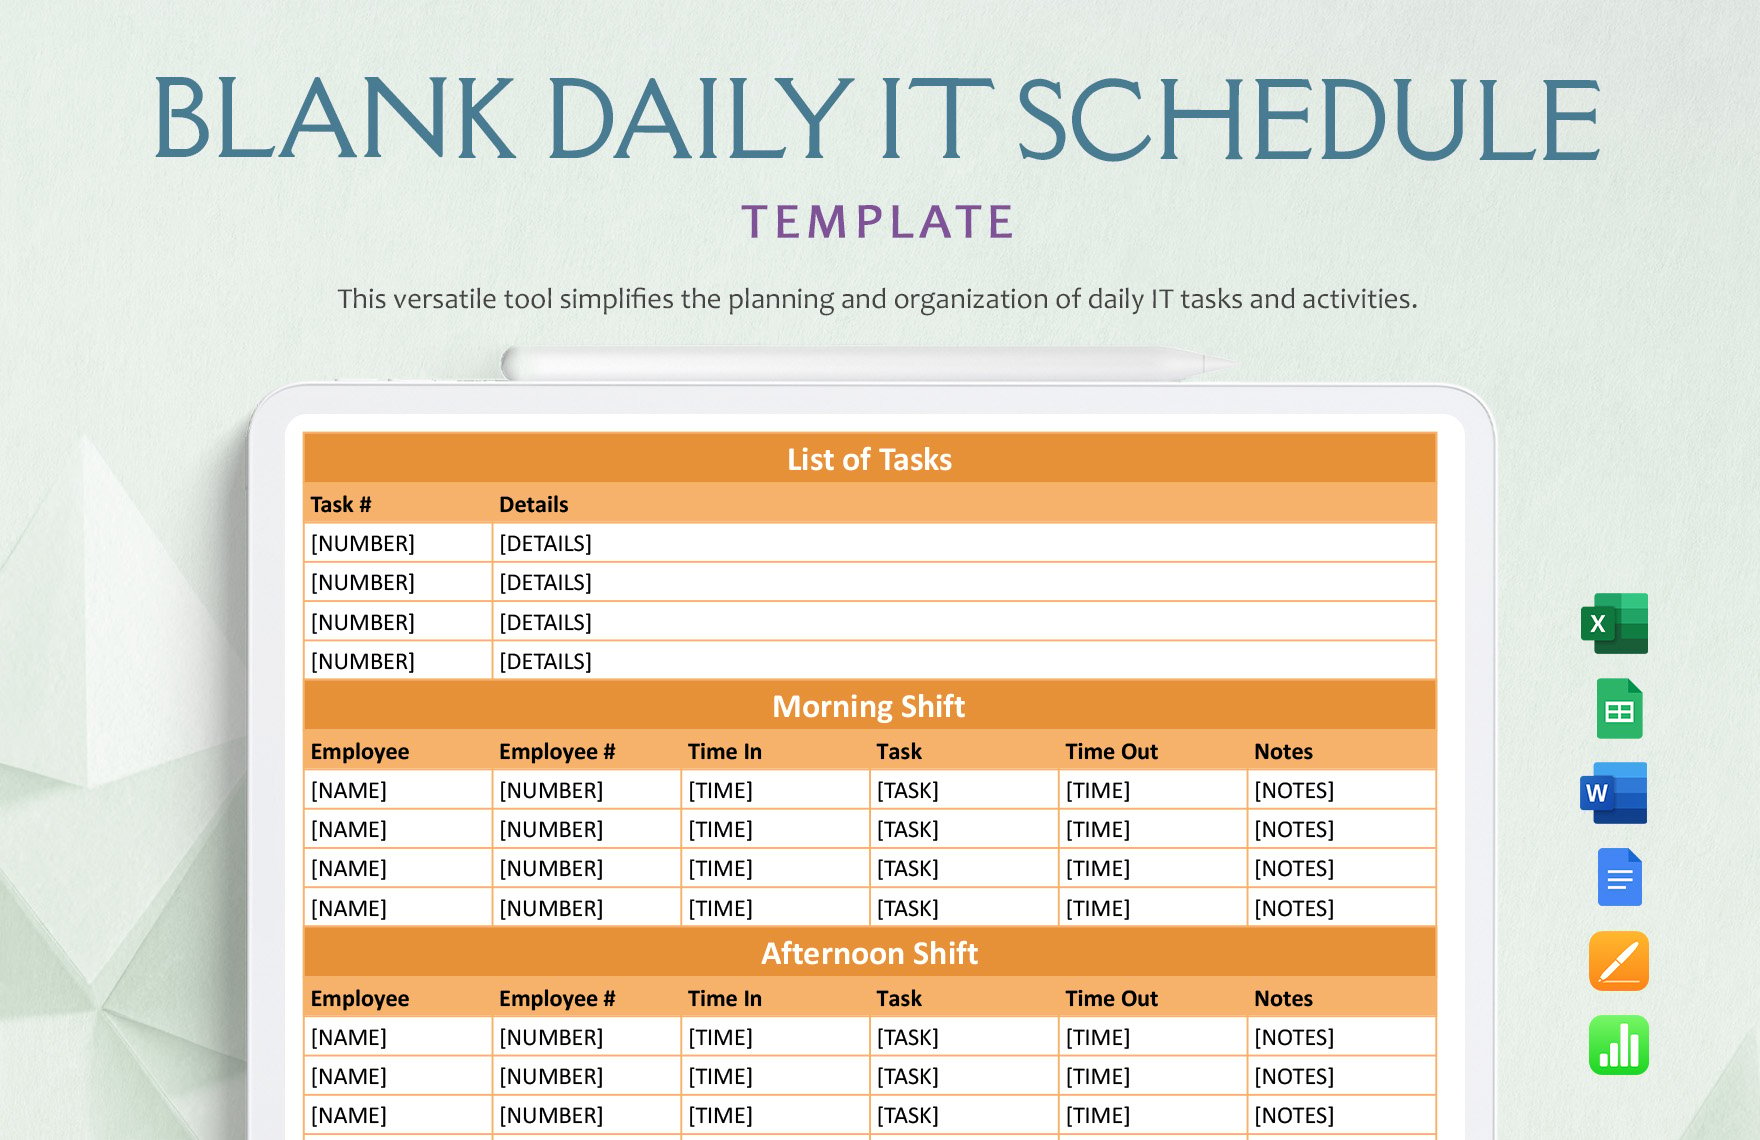 Free Blank Daily IT Schedule Template